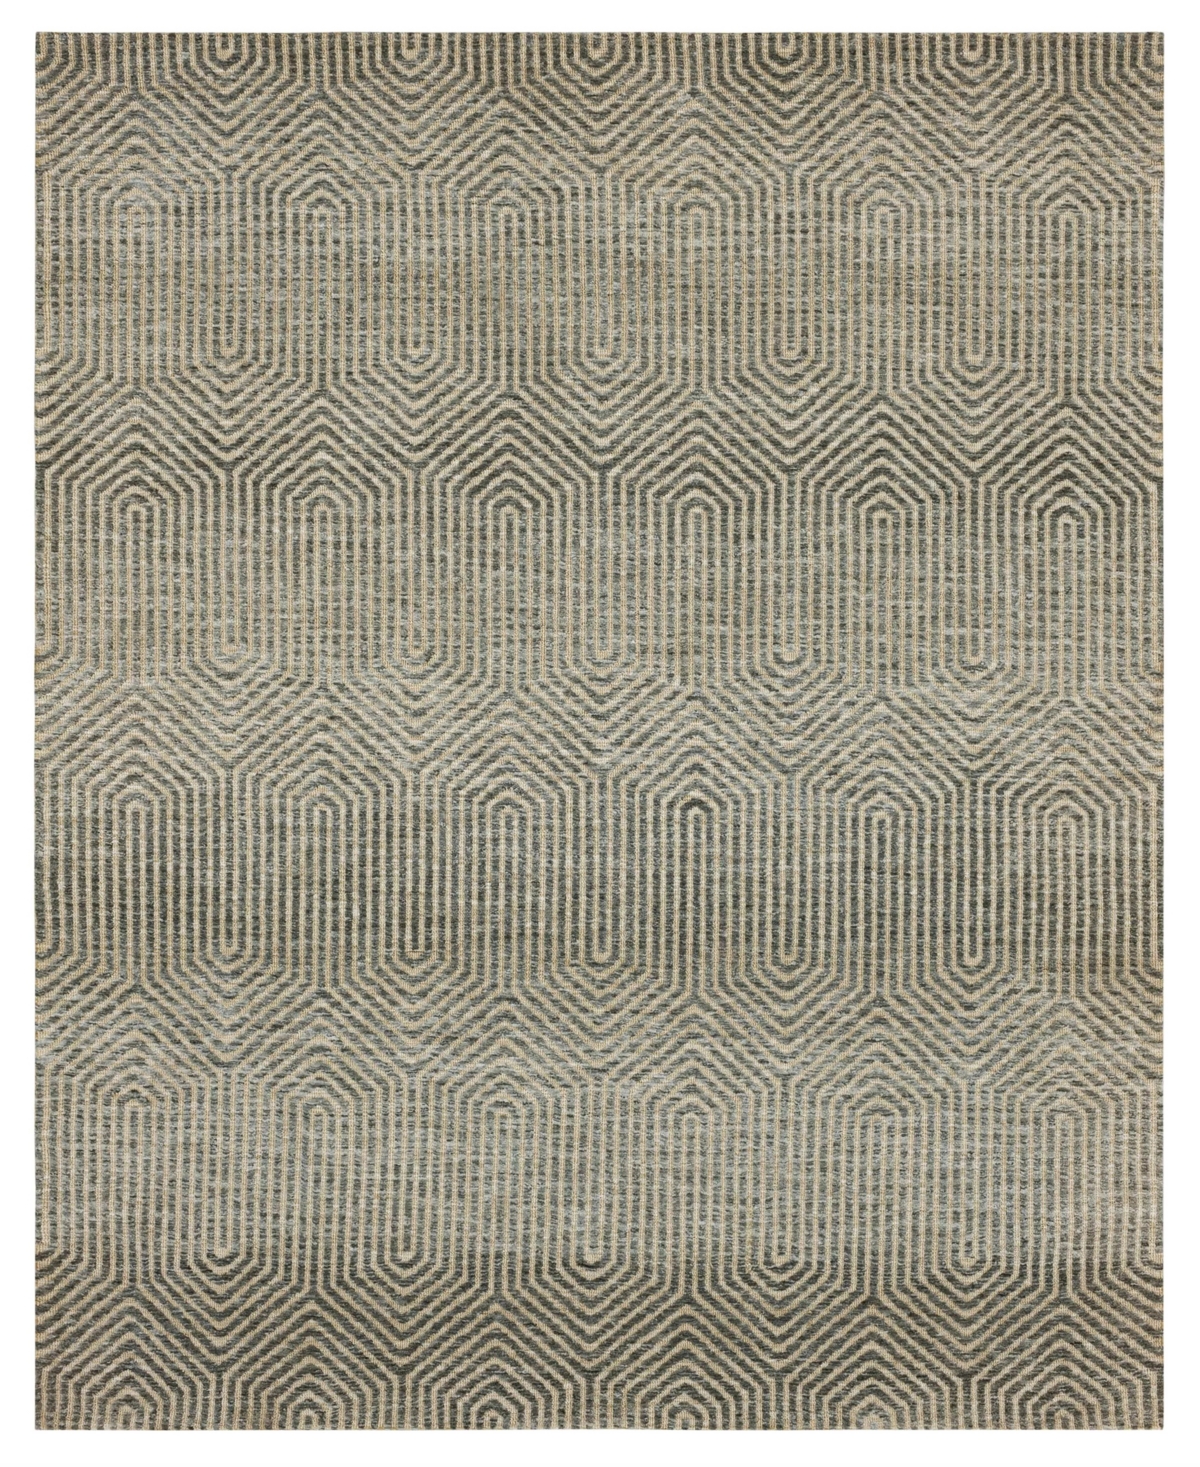 Drew & Jonathan Home Bowen Lost City 8' X 10' Area Rug In Neutral